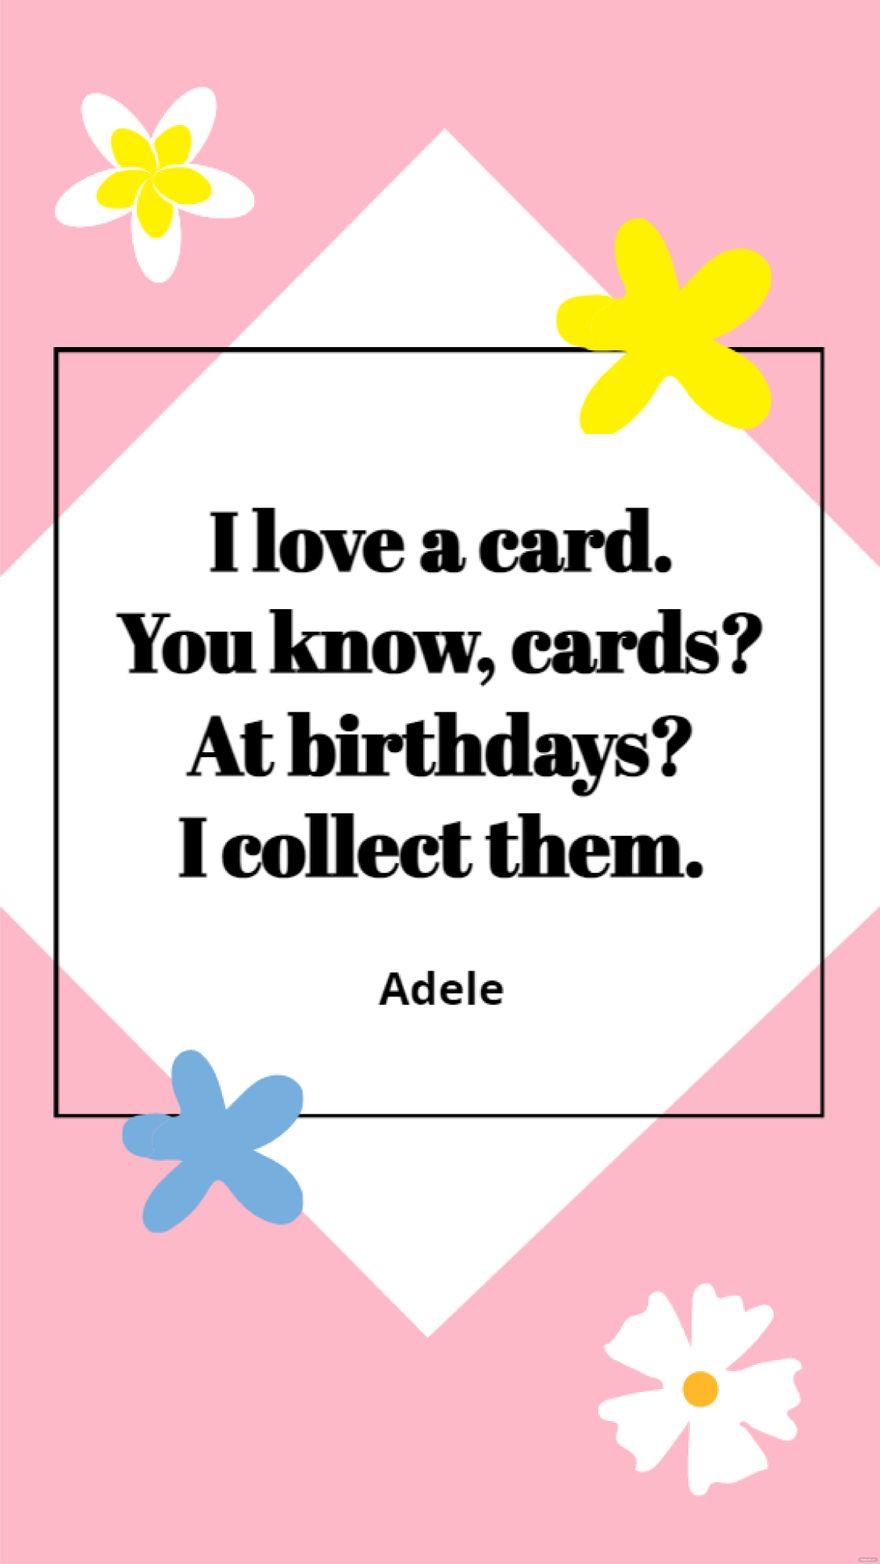 Adele - I love a card. You know, cards? At birthdays? I collect them. in JPG